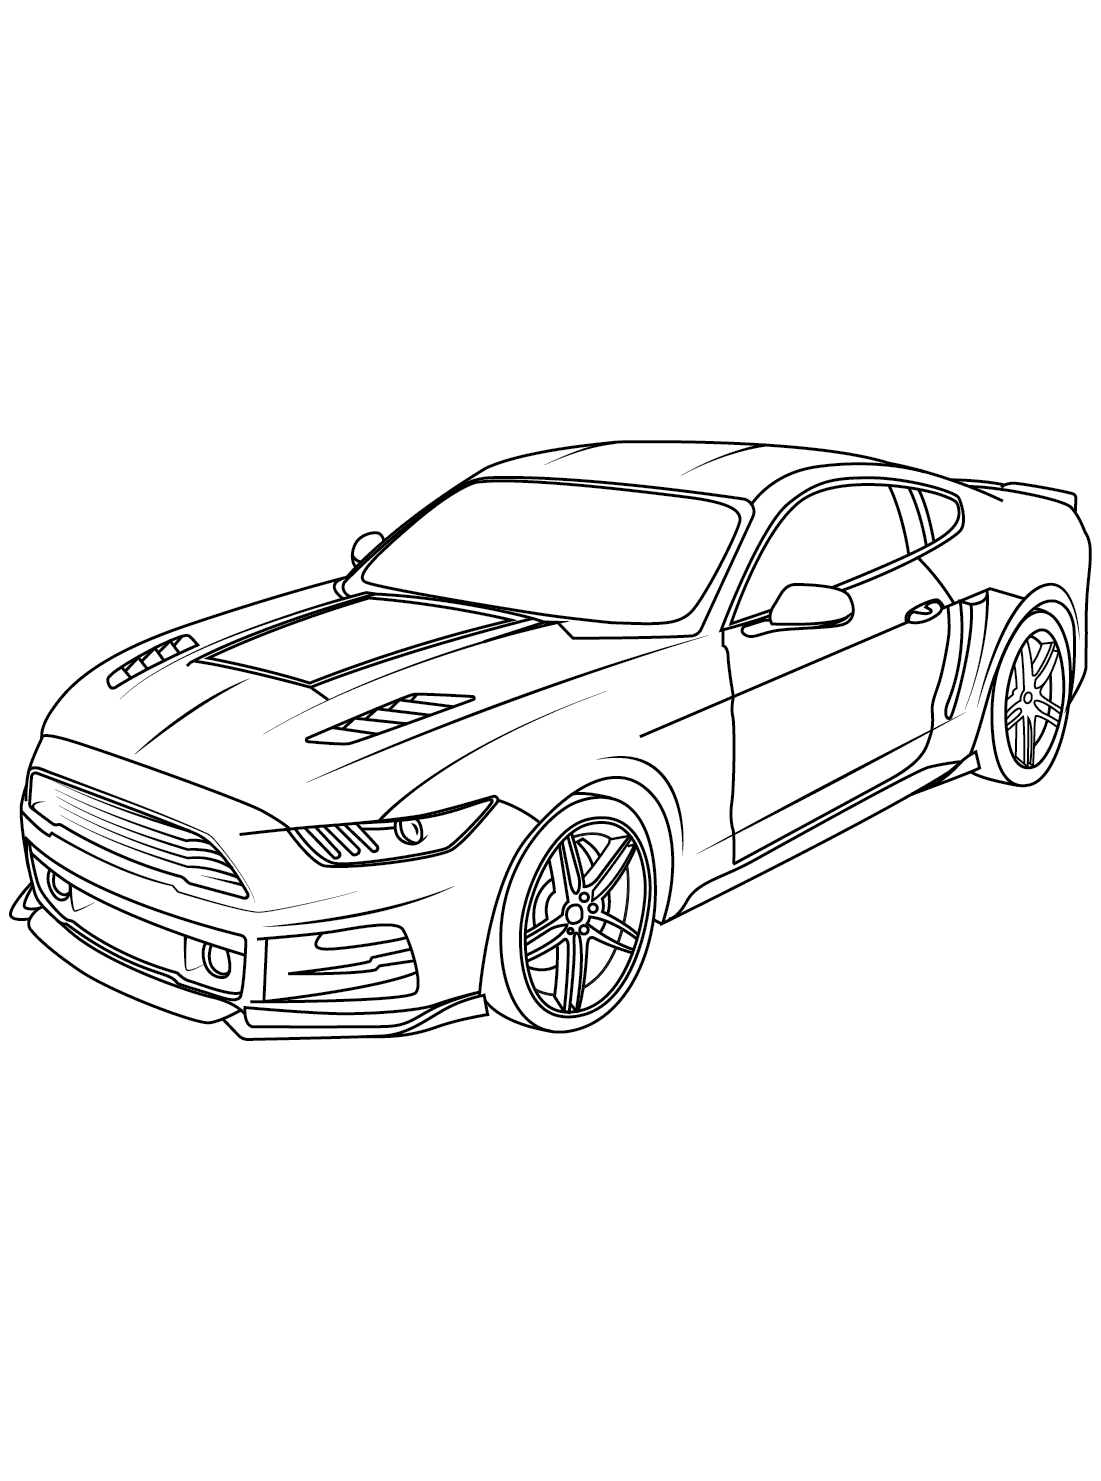 Car Coloring Pages Free Online For Kids